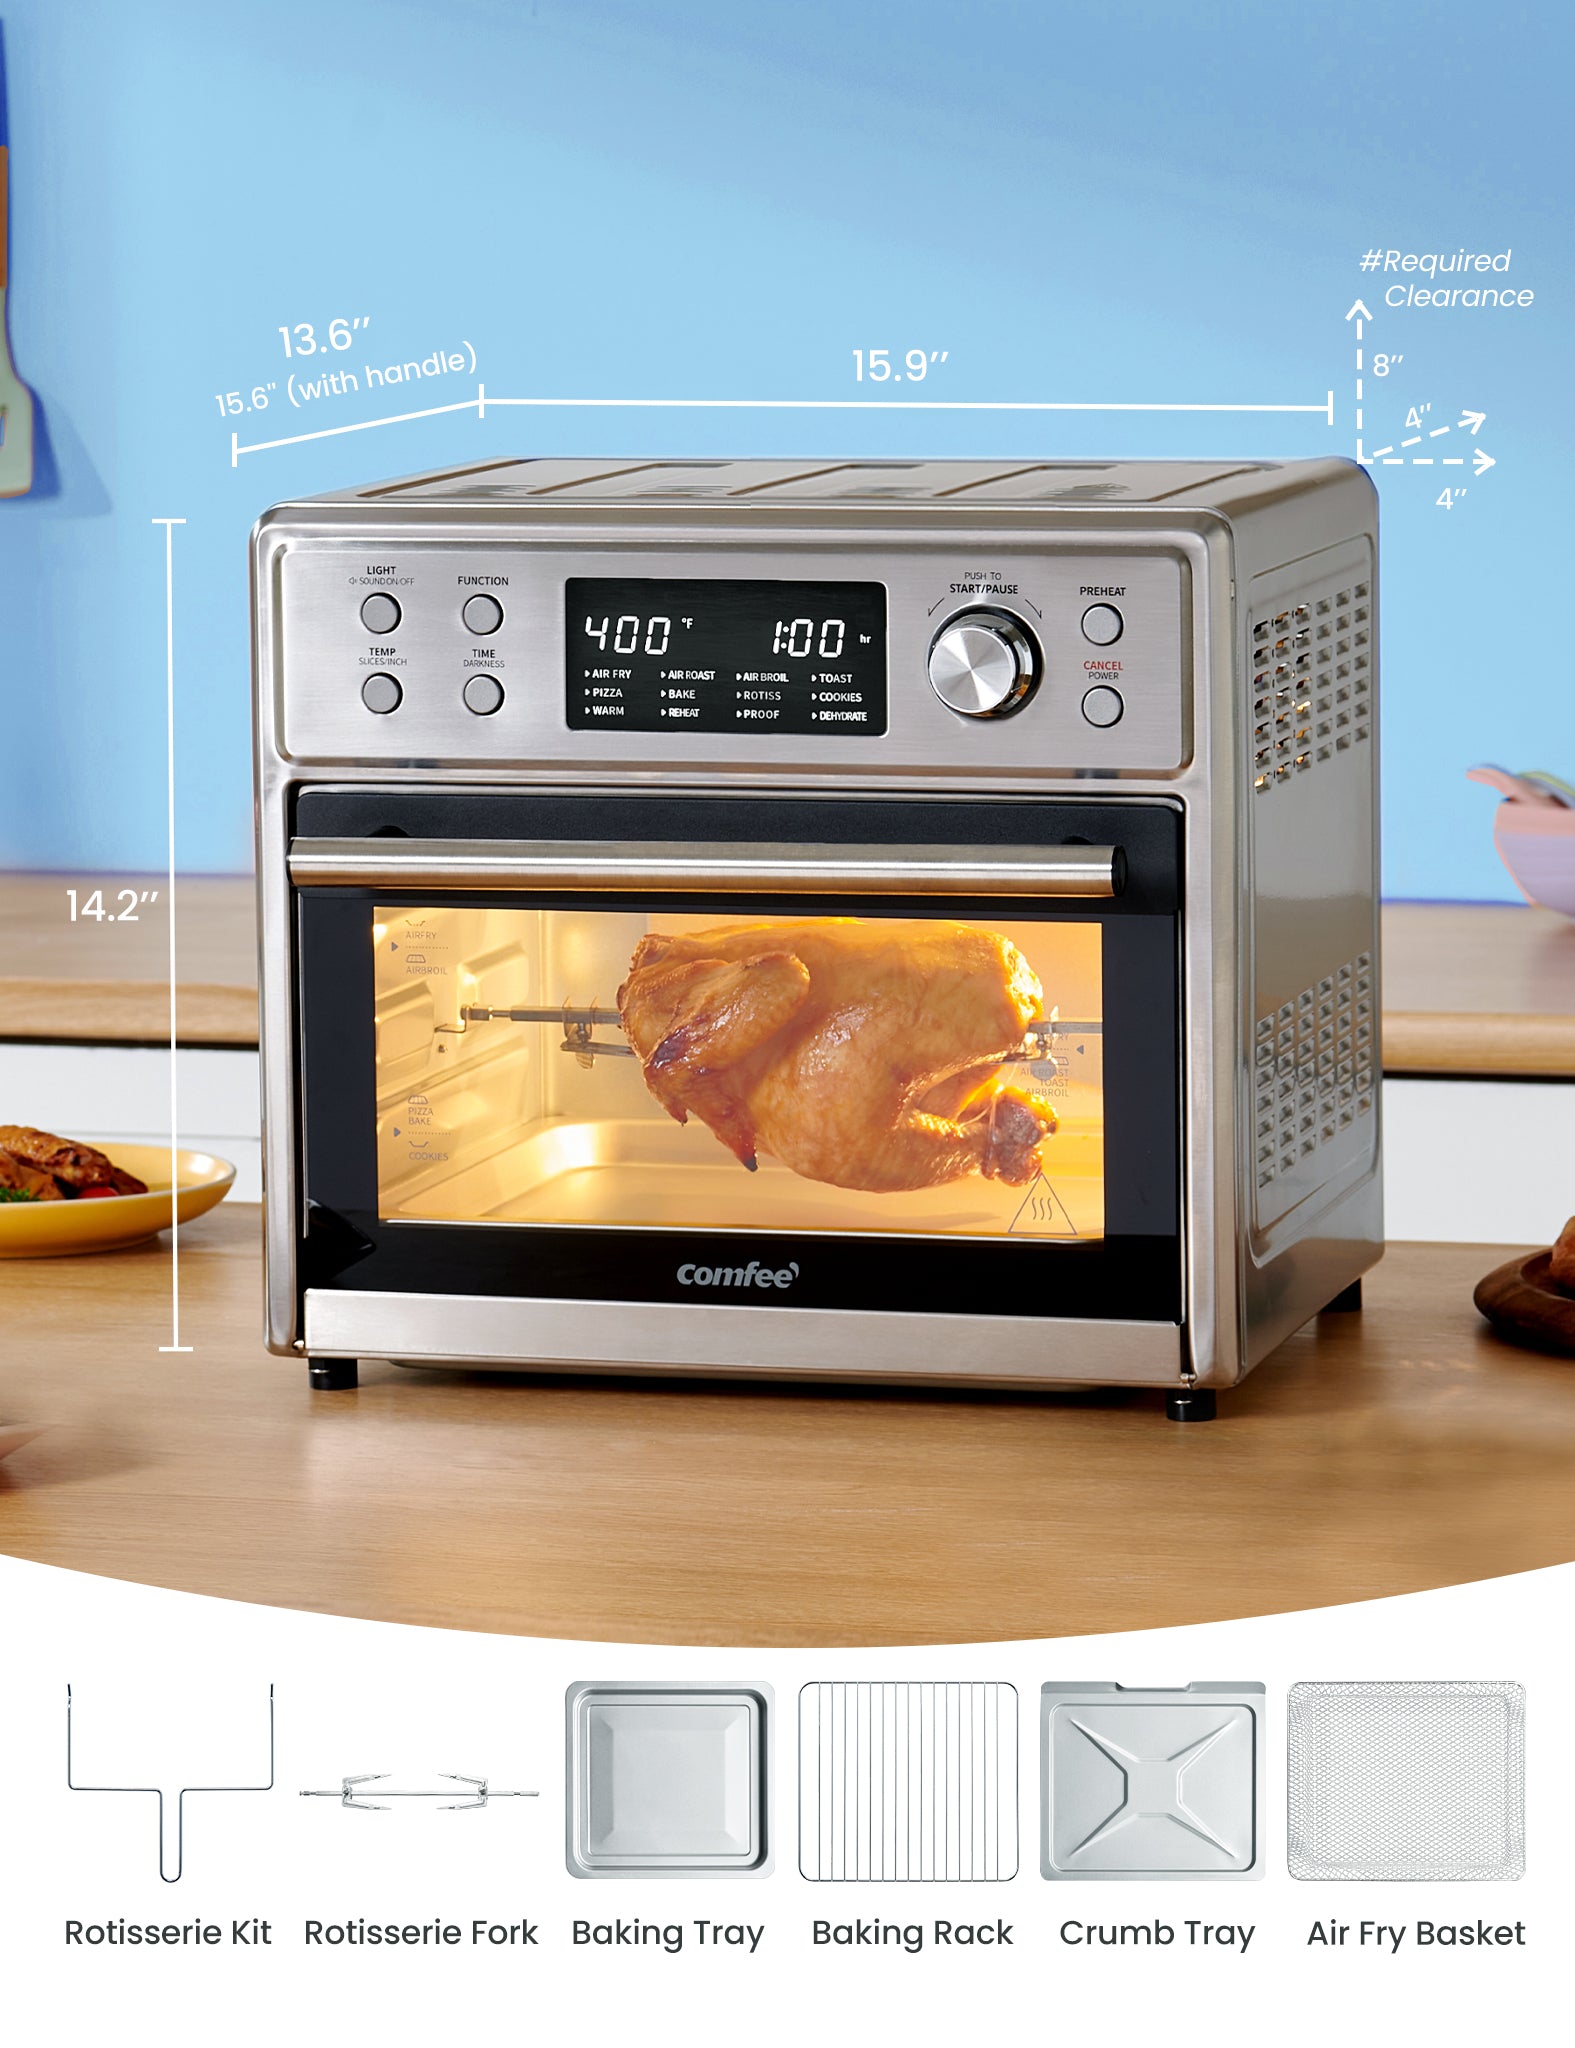 Dimensions of the air fryer toaster oven and six accessories